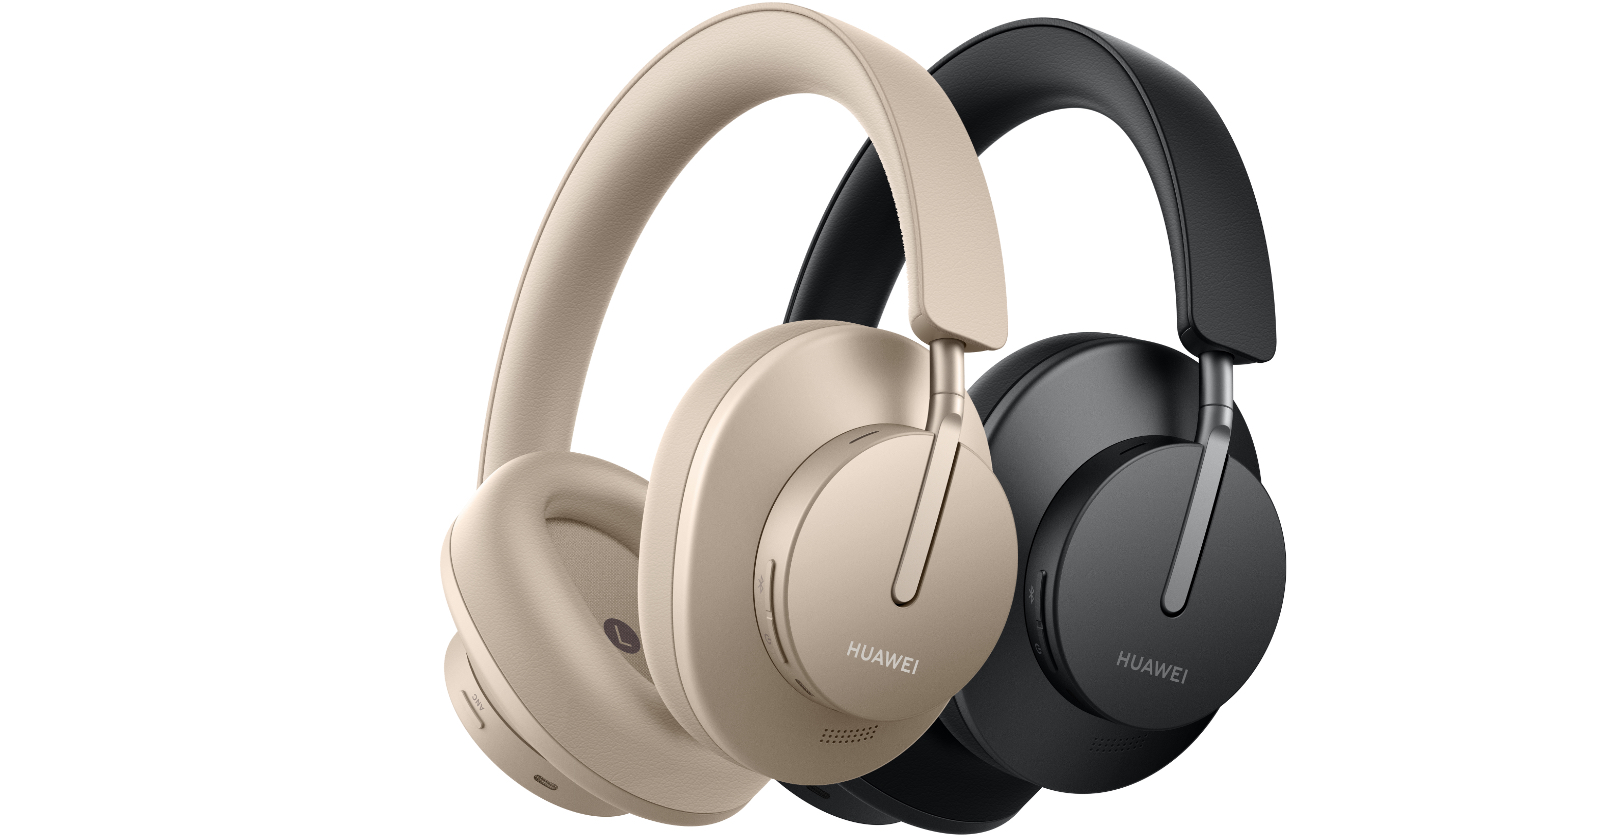 Huawei Headphones Offer Pure and Clear Sound